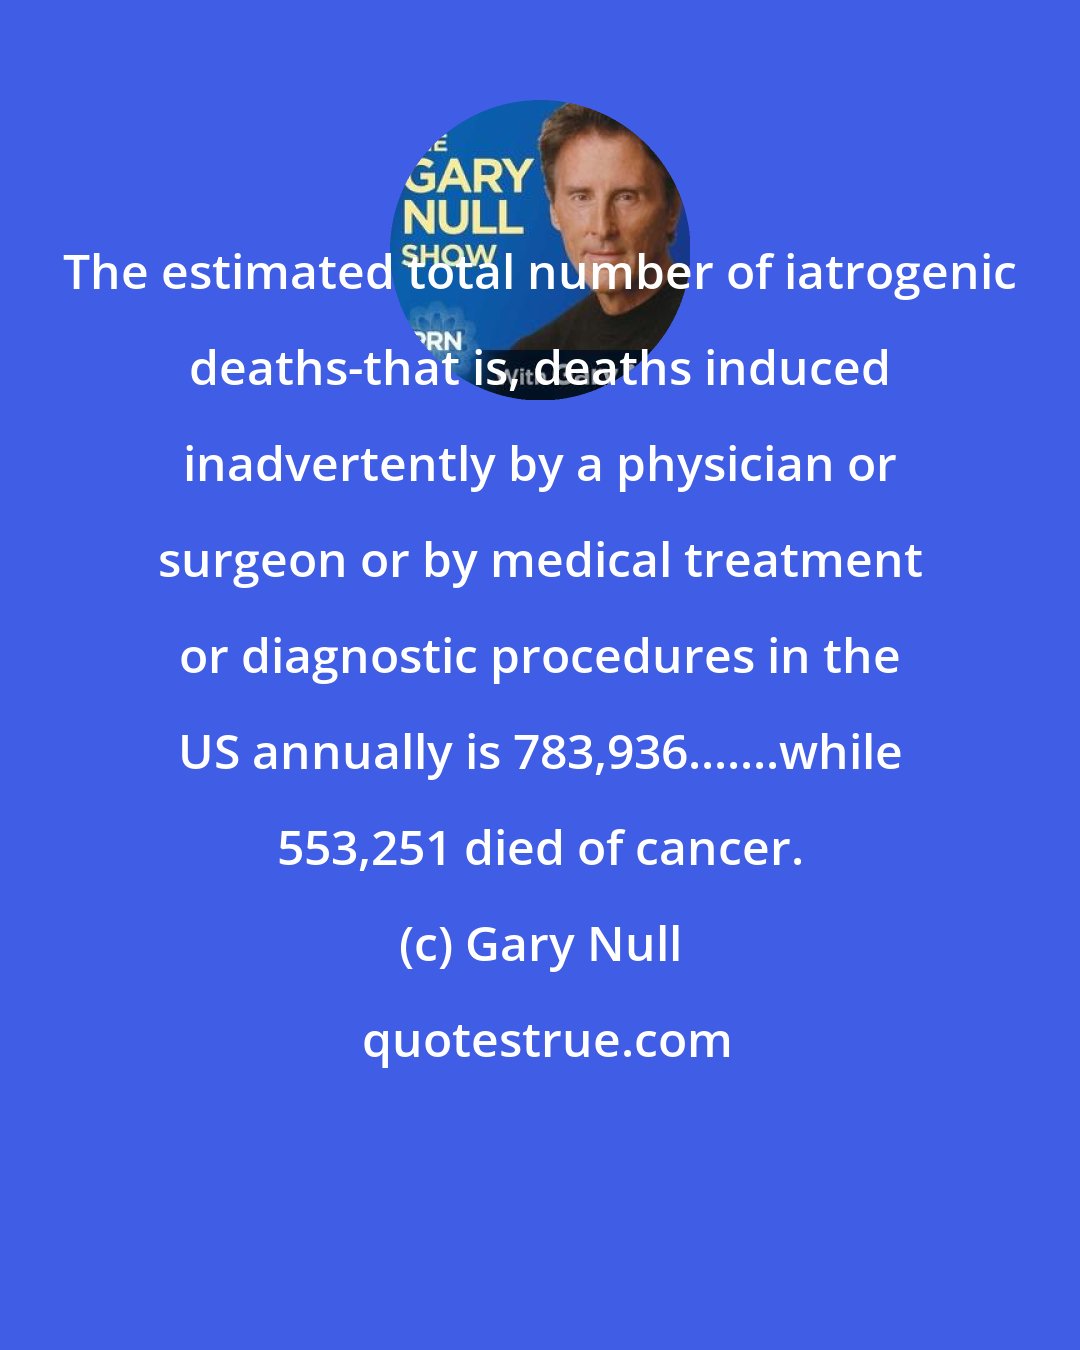 Gary Null: The estimated total number of iatrogenic deaths-that is, deaths induced inadvertently by a physician or surgeon or by medical treatment or diagnostic procedures in the US annually is 783,936.......while 553,251 died of cancer.